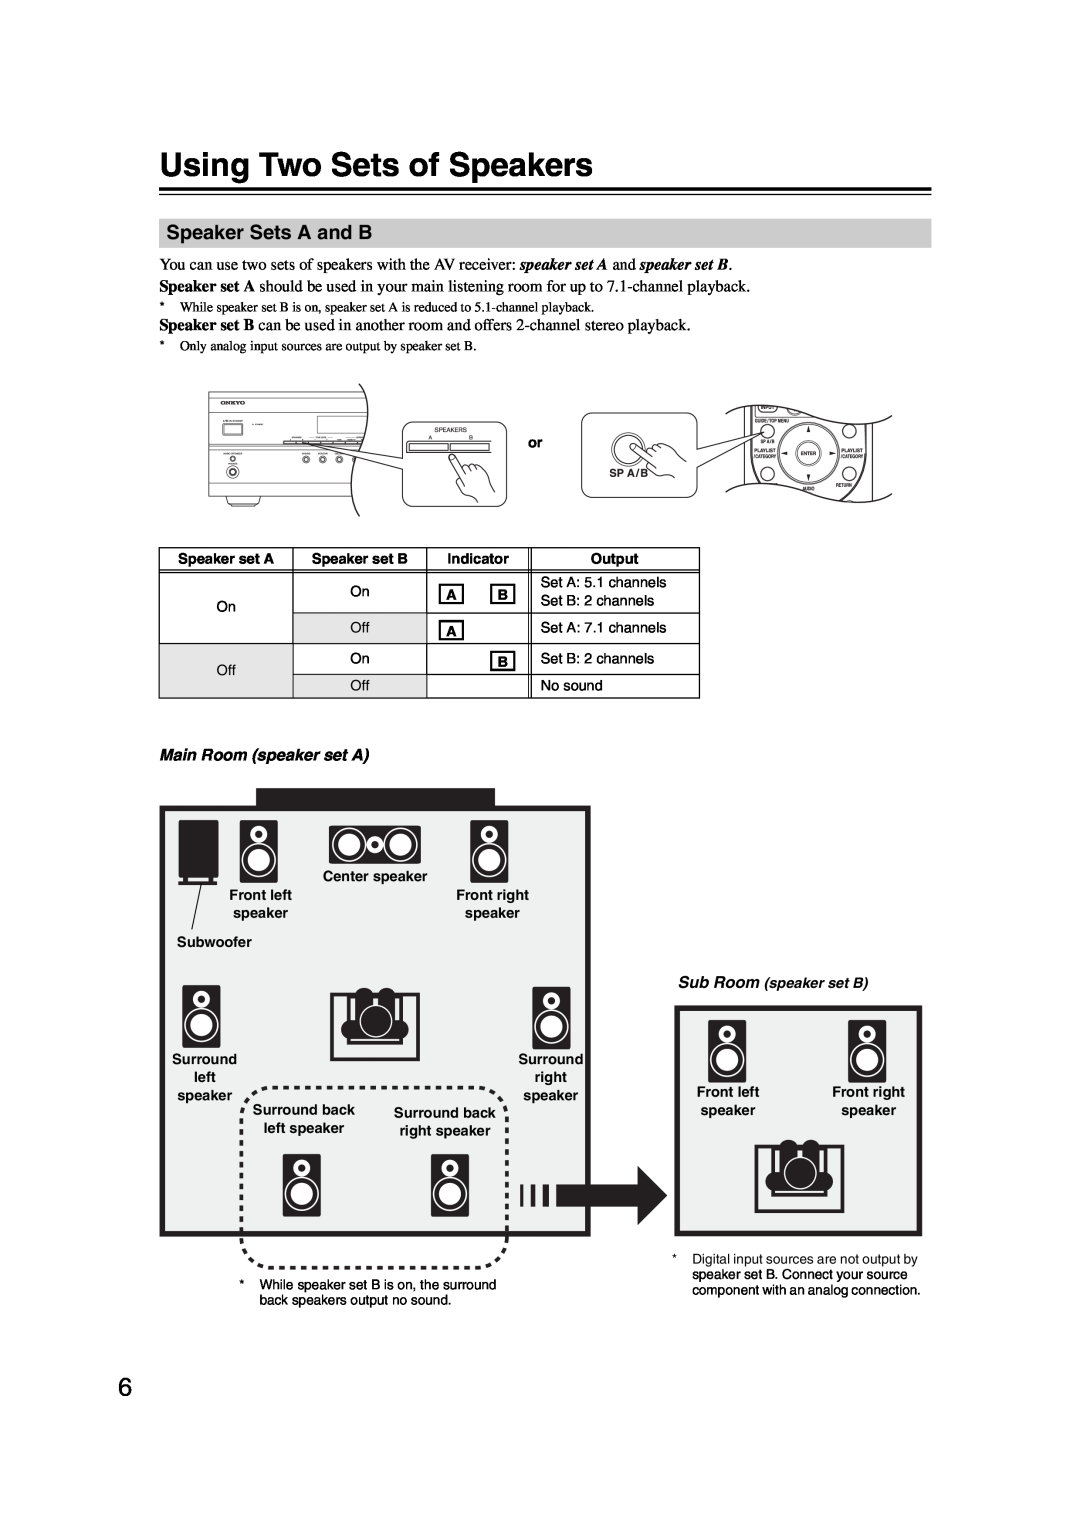 Onkyo 29344934 instruction manual Using Two Sets of Speakers, Speaker Sets A and B, Main Room speaker set A 